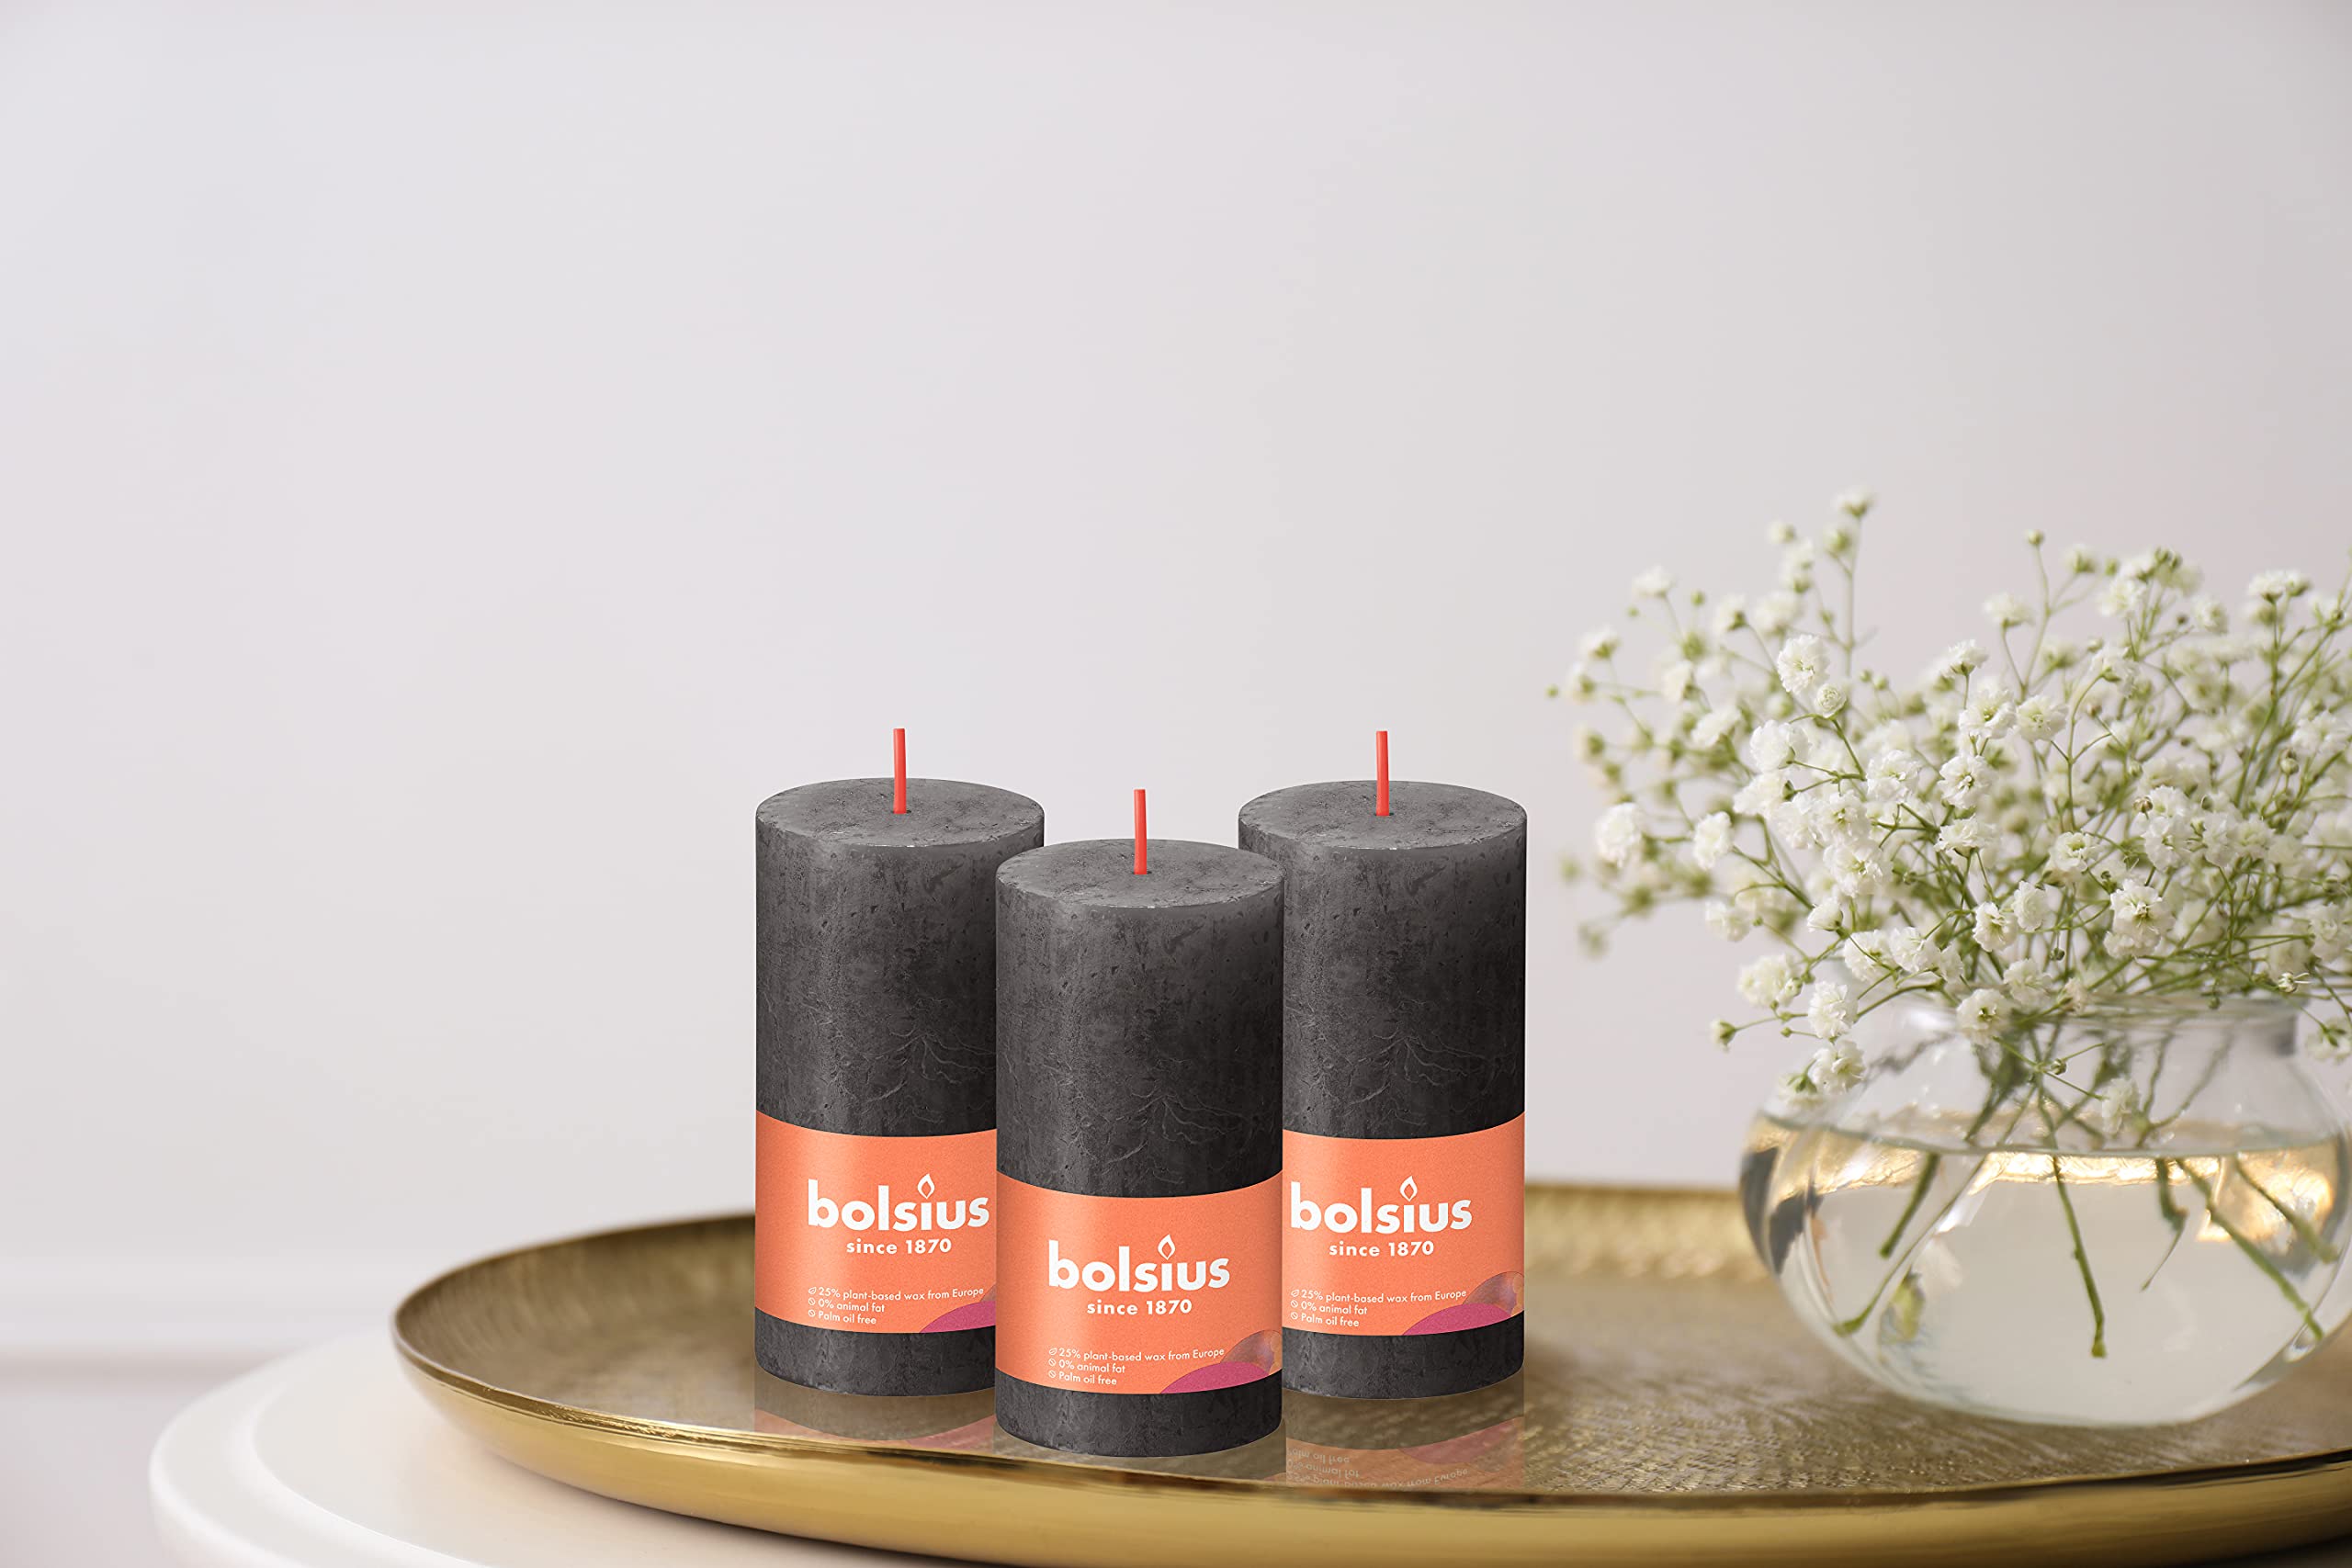 BOLSIUS 4 Pack Stormy Gray Rustic Pillar Candles - 2 X 4 Inches - Premium European Quality - Includes Natural Plant-Based Wax - Unscented Dripless Smokeless 30 Hour Party D�cor and Wedding Candles  - Acceptable